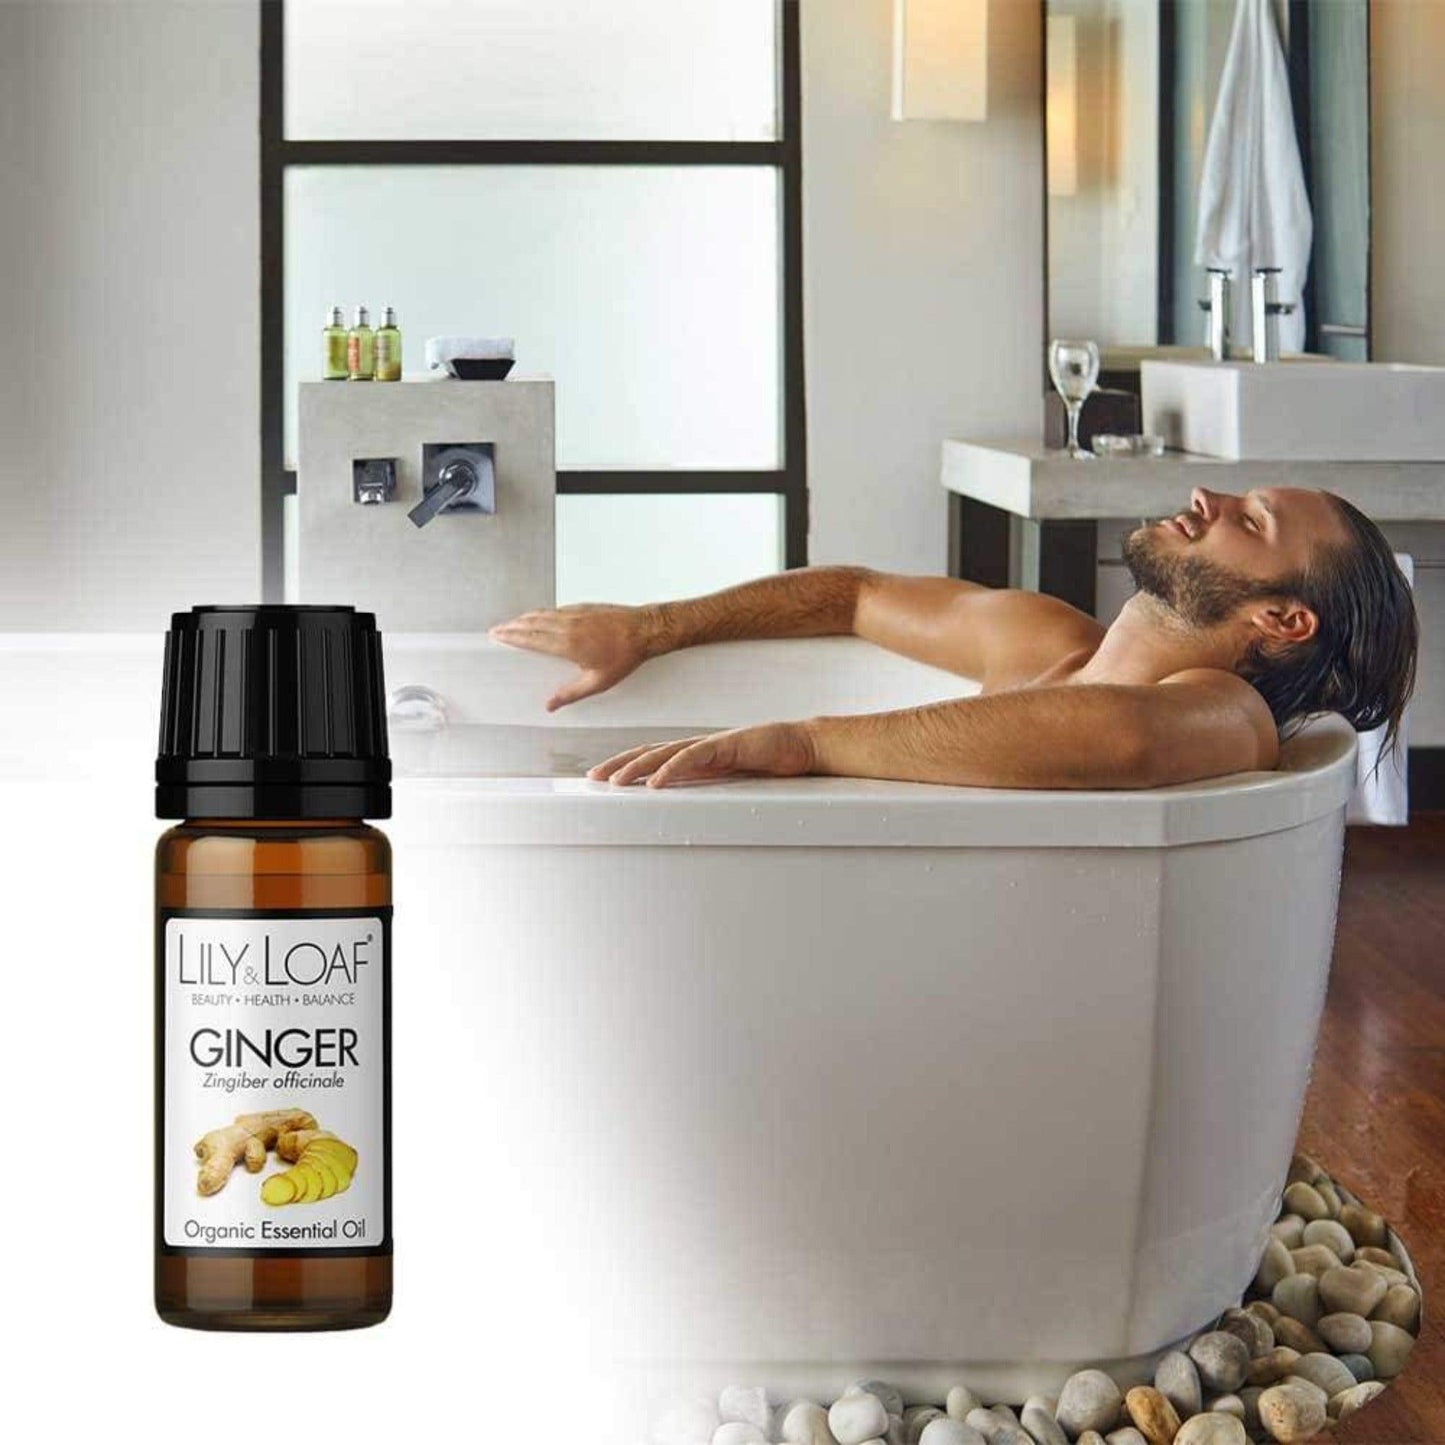 Ginger Organic Essential Oil male in relaxing bath